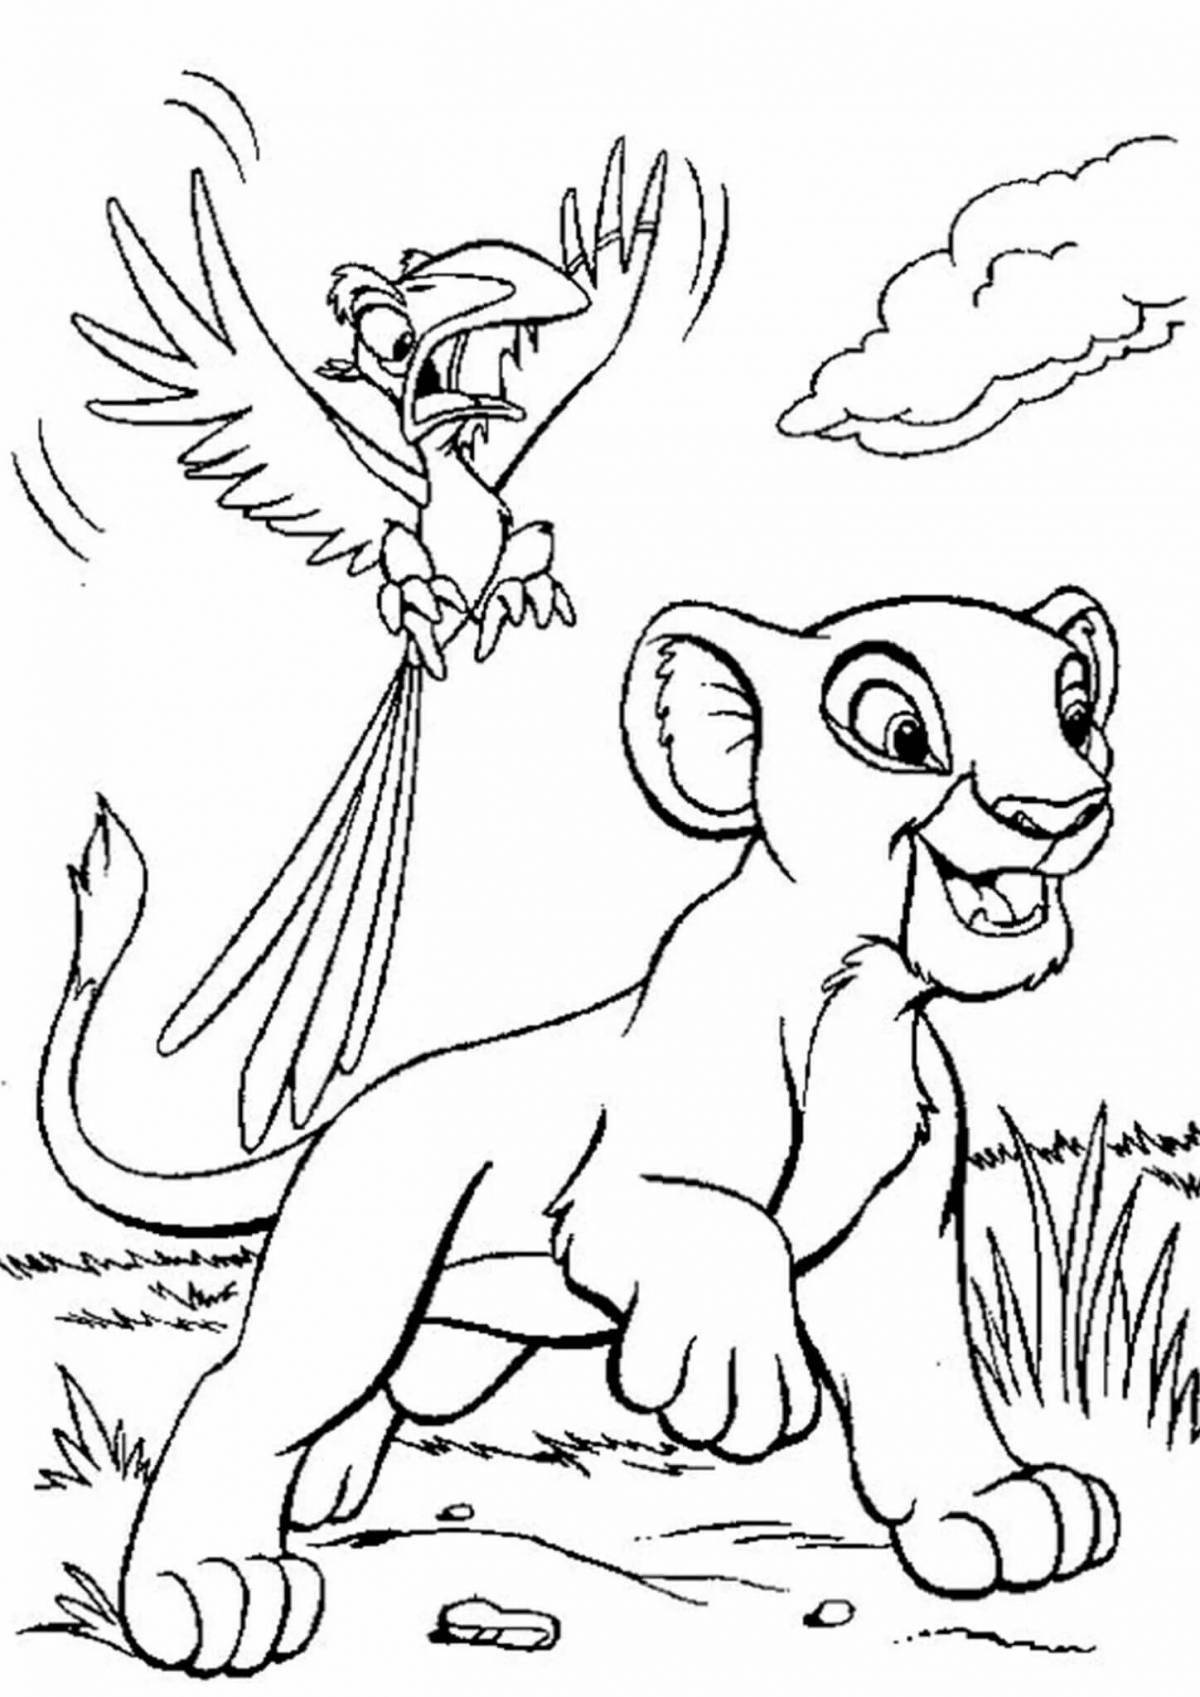 Amazing simba coloring page for kids